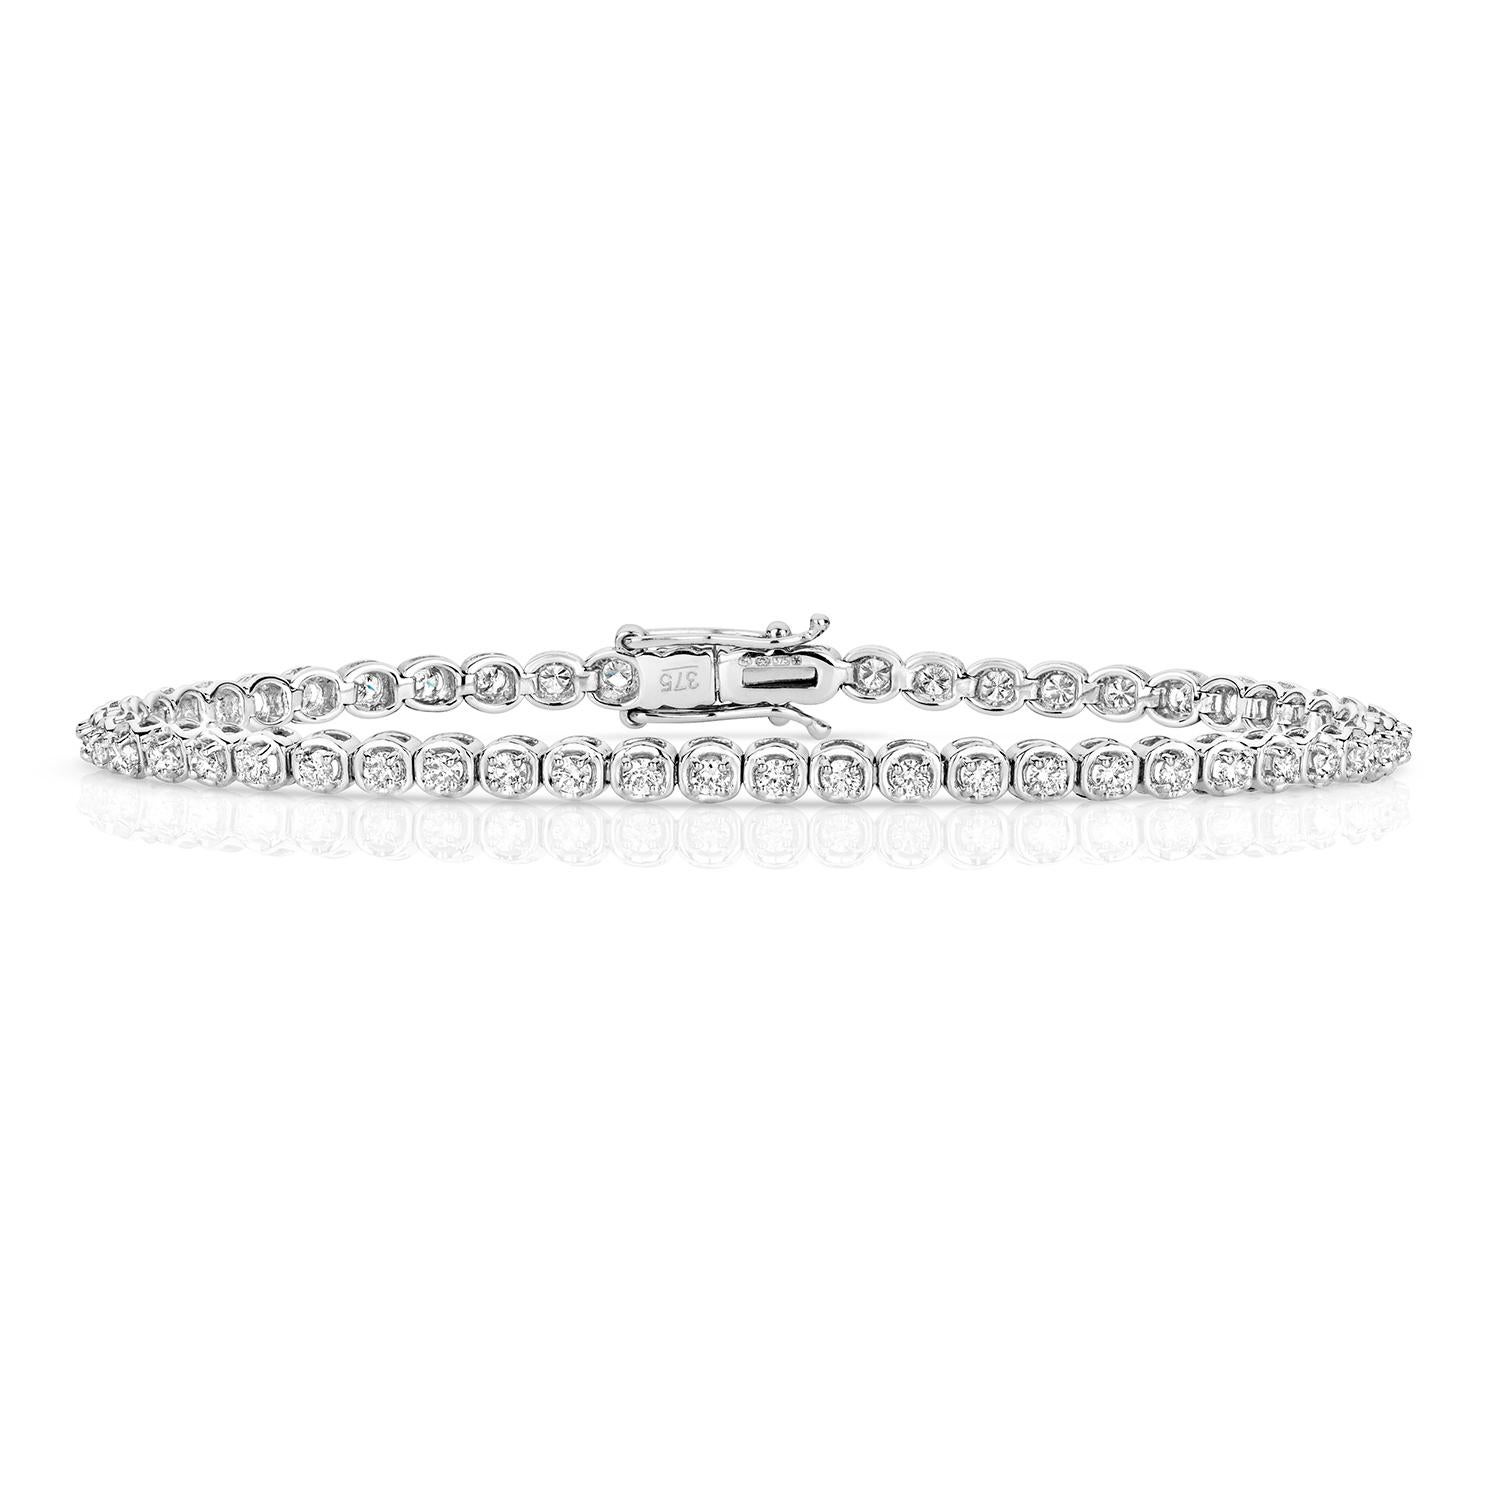 DIAMOND BRACELET

9CT W/G HI I1 1.50CT

Weight: 6.7g

Number Of Stones:53

Total Carates:1.500